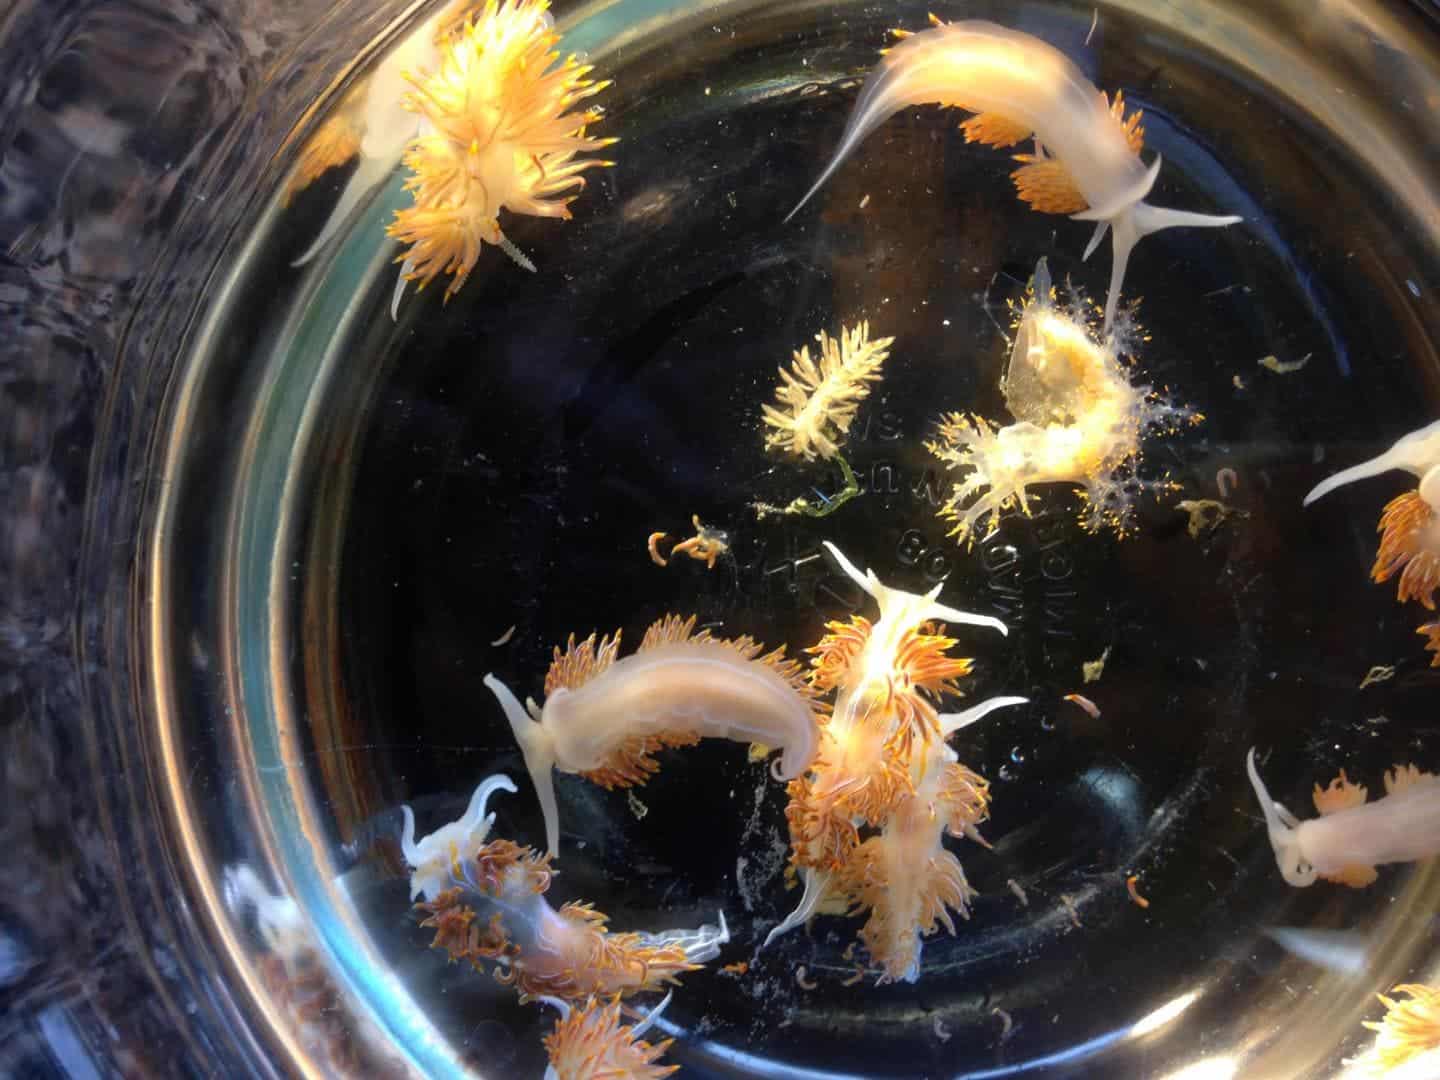 These are marine sea slugs from a Japanese vessel from Iwate Prefecture, washed ashore in Oregon in April 2015. Credits: John Chapman.